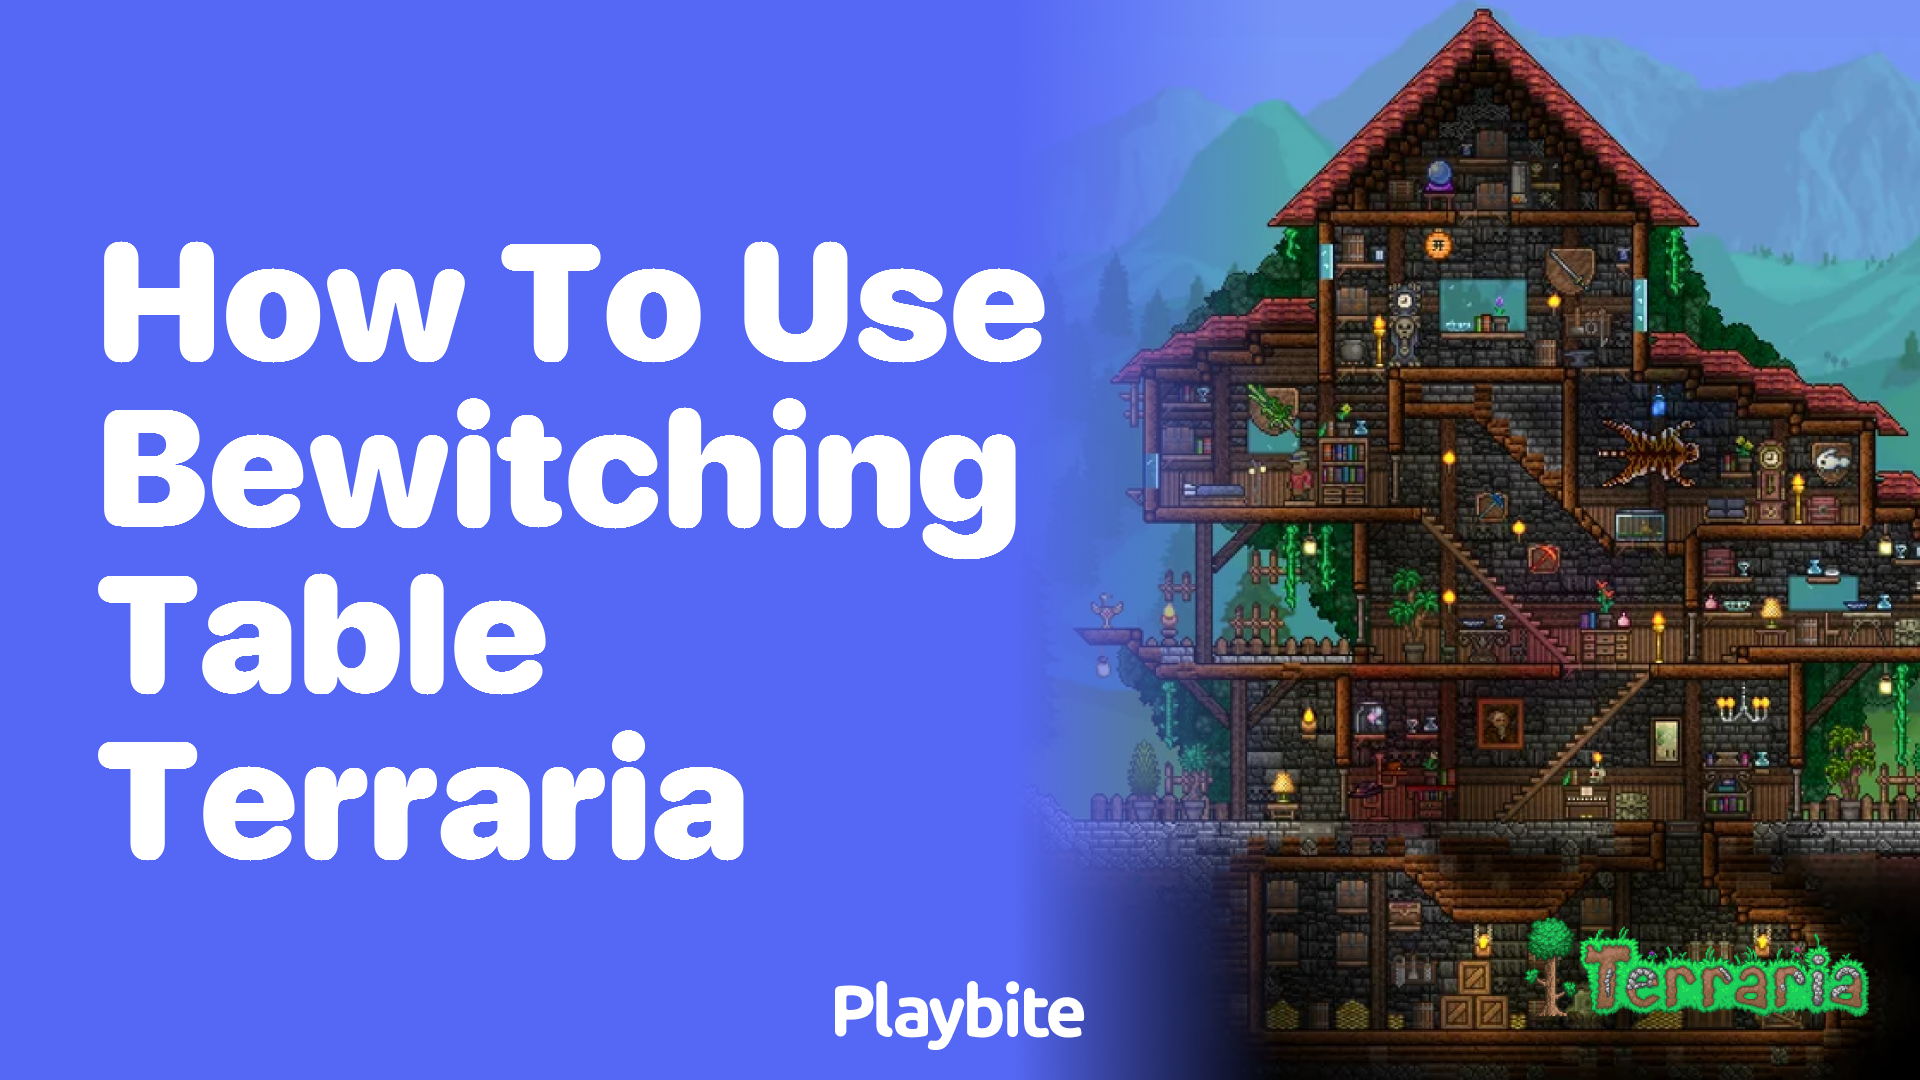 How to use the Bewitching Table in Terraria